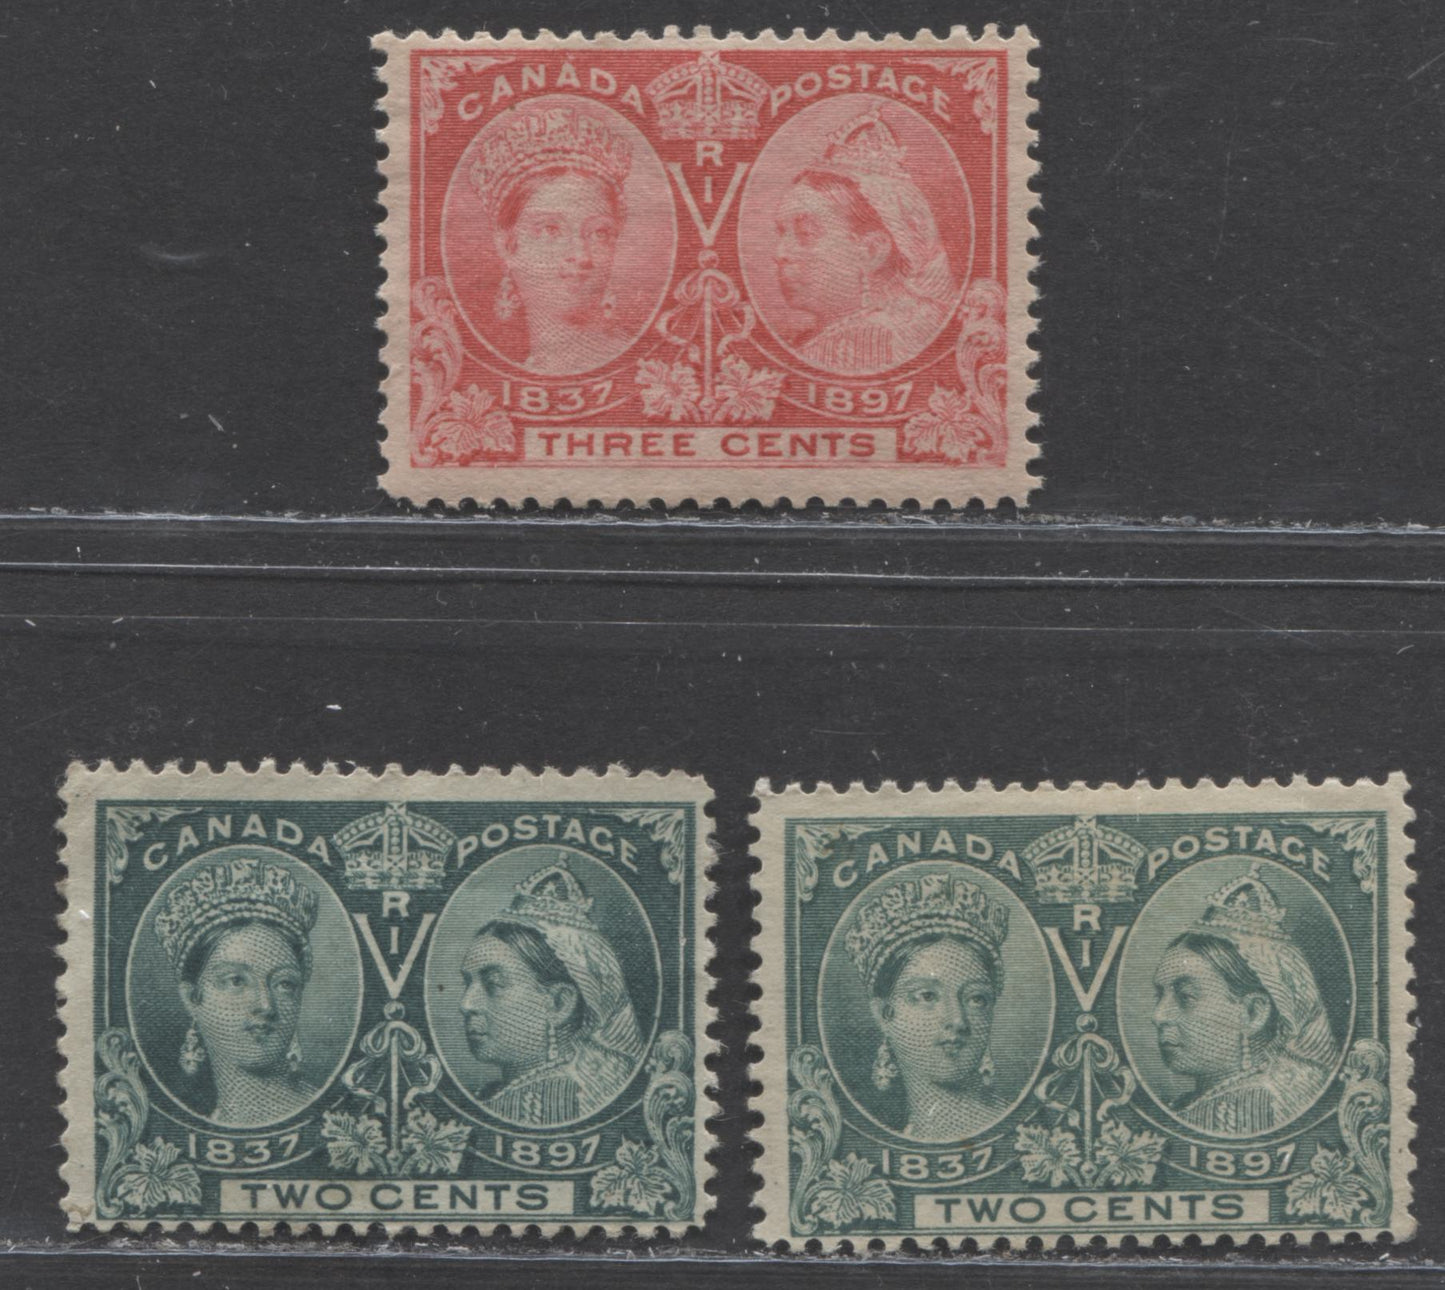 Lot 69 Canada #52, 52i, 53 2c and 3c Green, Deep Green and Bright Rose Queen Victoria, 1897 Diamond Jubilee Issue, Three Fine and VF Unused Examples